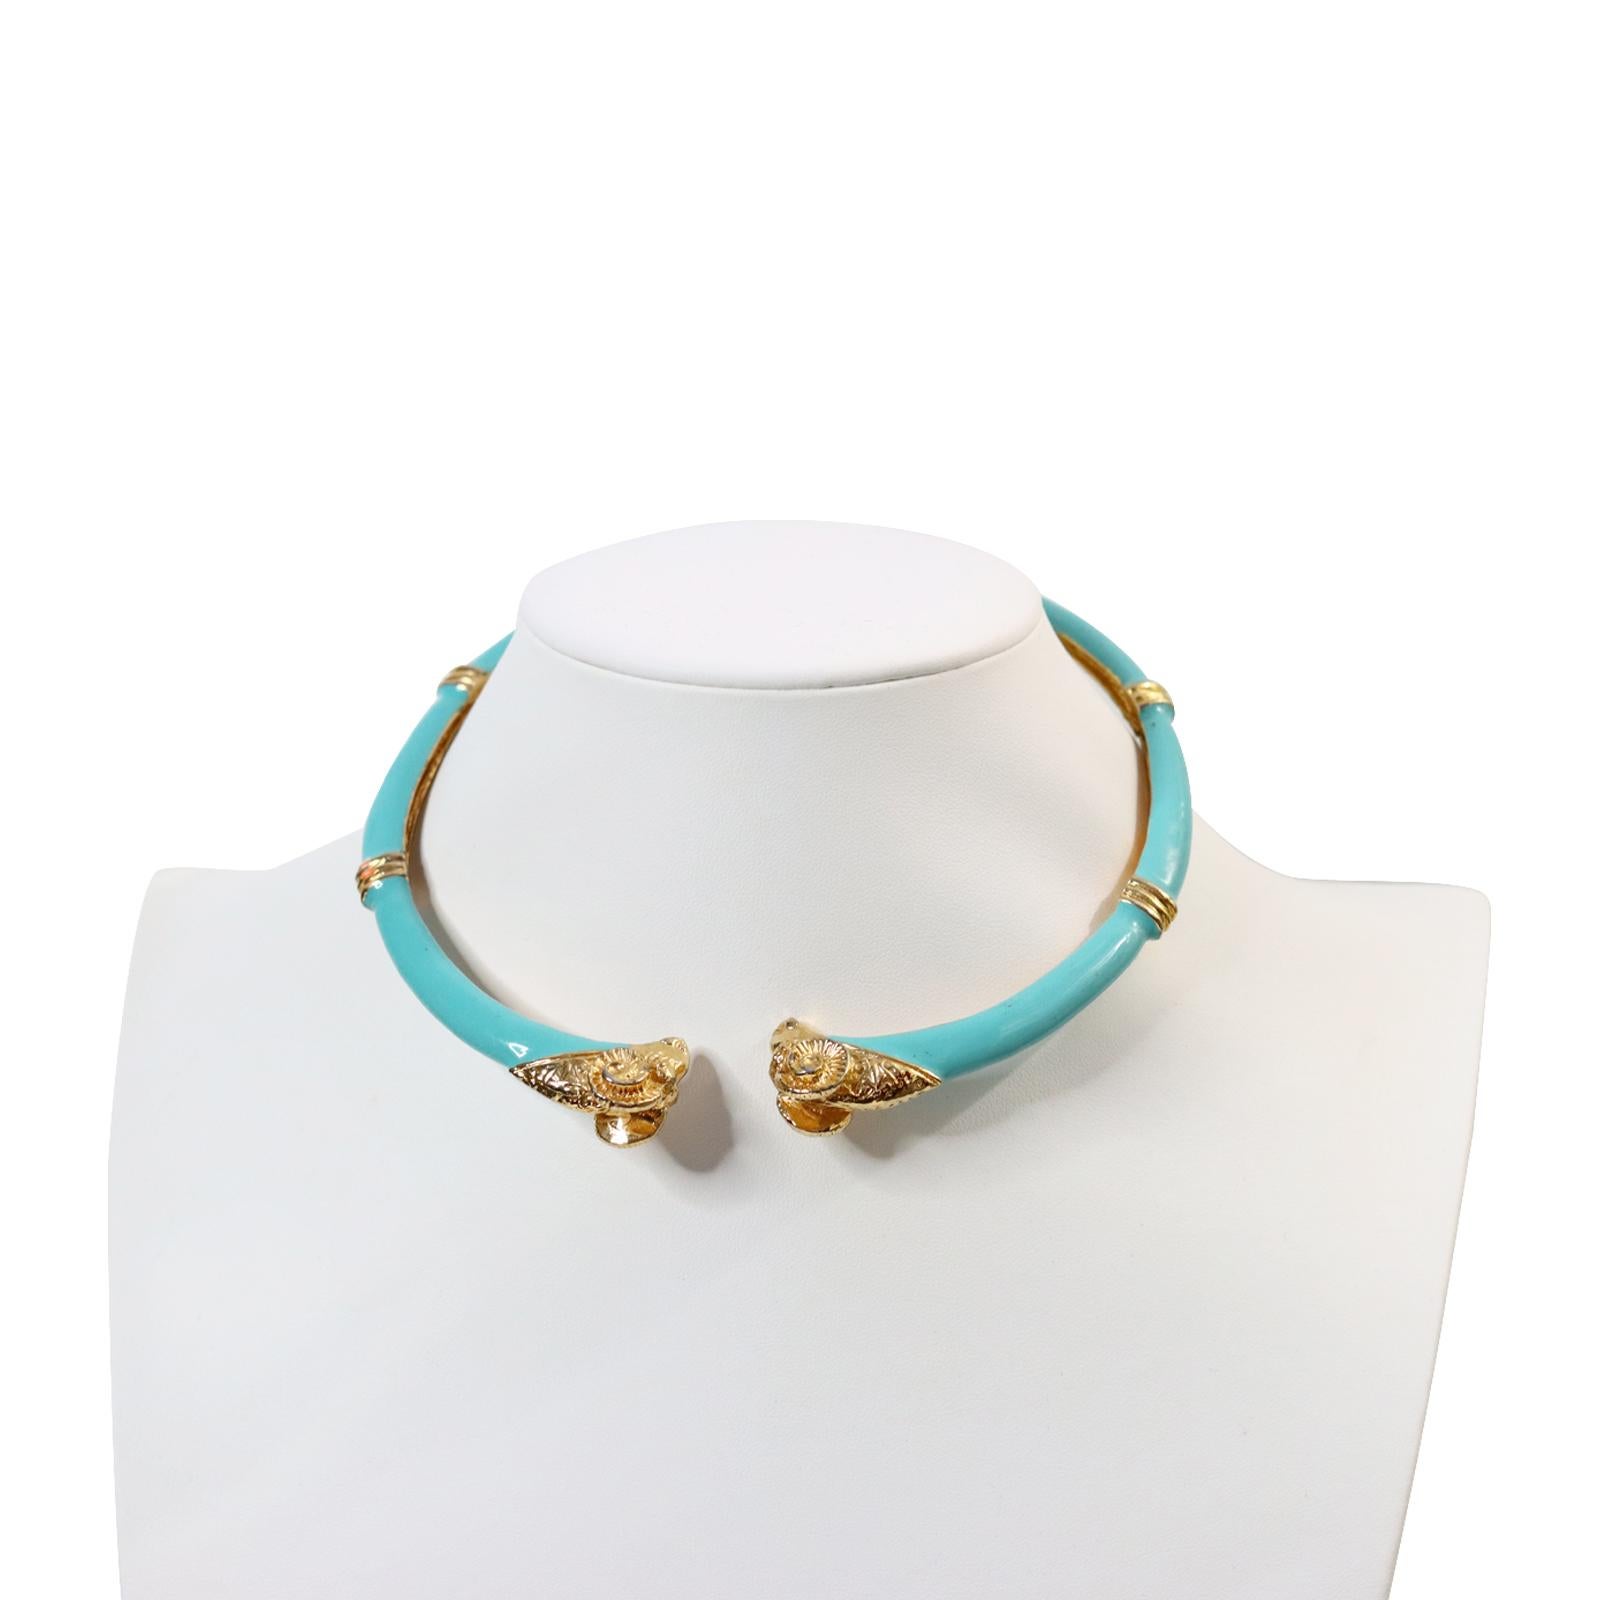 Art Deco Vintage Donald Stannard Rams Head Choker in Turquoise and Gold Circa 1980s